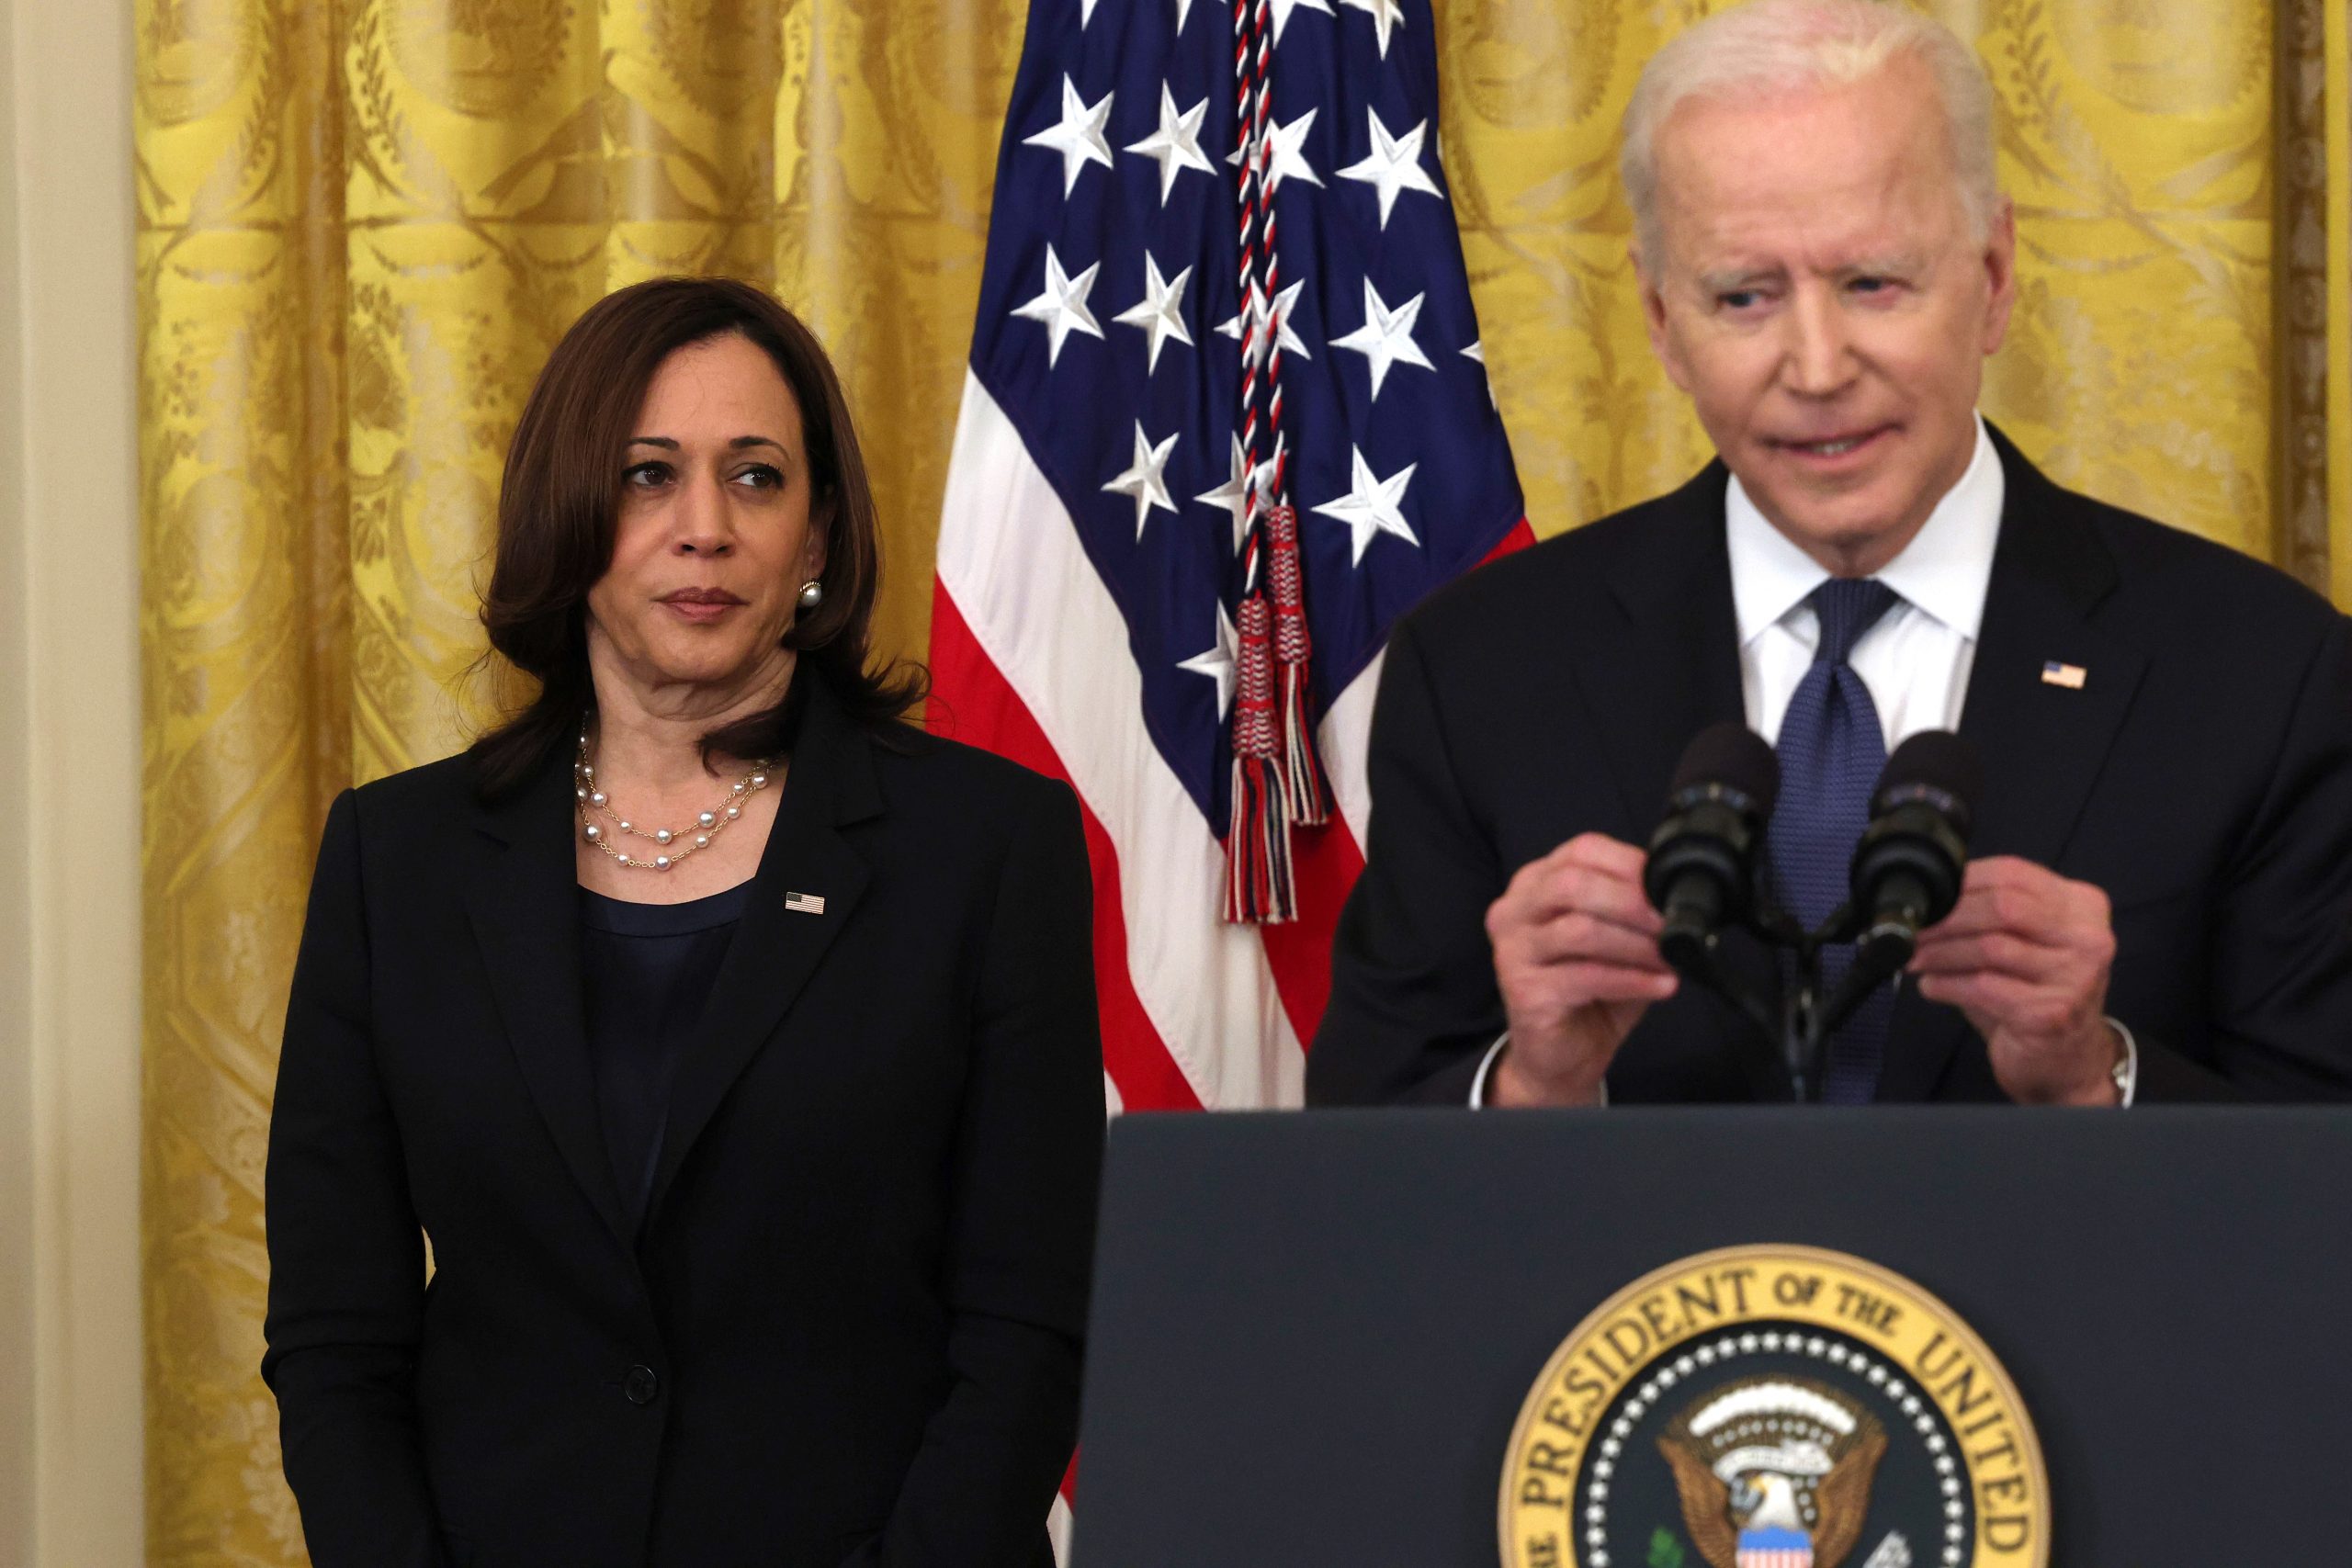 WASHINGTON, DC - MAY 20: Vice President Kamala Harris listens as U.S. President Joe Biden gives remarks, before a signing ceremony for the COVID-19 Hate Crimes Act in the East Room of the White House on May 20, 2021 in Washington, DC.  The legislation, drafted in response to the increased violence against the Asian American and Pacific Islander (AAPI) community during the Coronavirus pandemic, will create a new position in the Department of Justice to focus on the rise in hate crimes and provide resources to federal, state, and local jurisdictions to better report cases. (Photo by Anna Moneymaker/Getty Images).